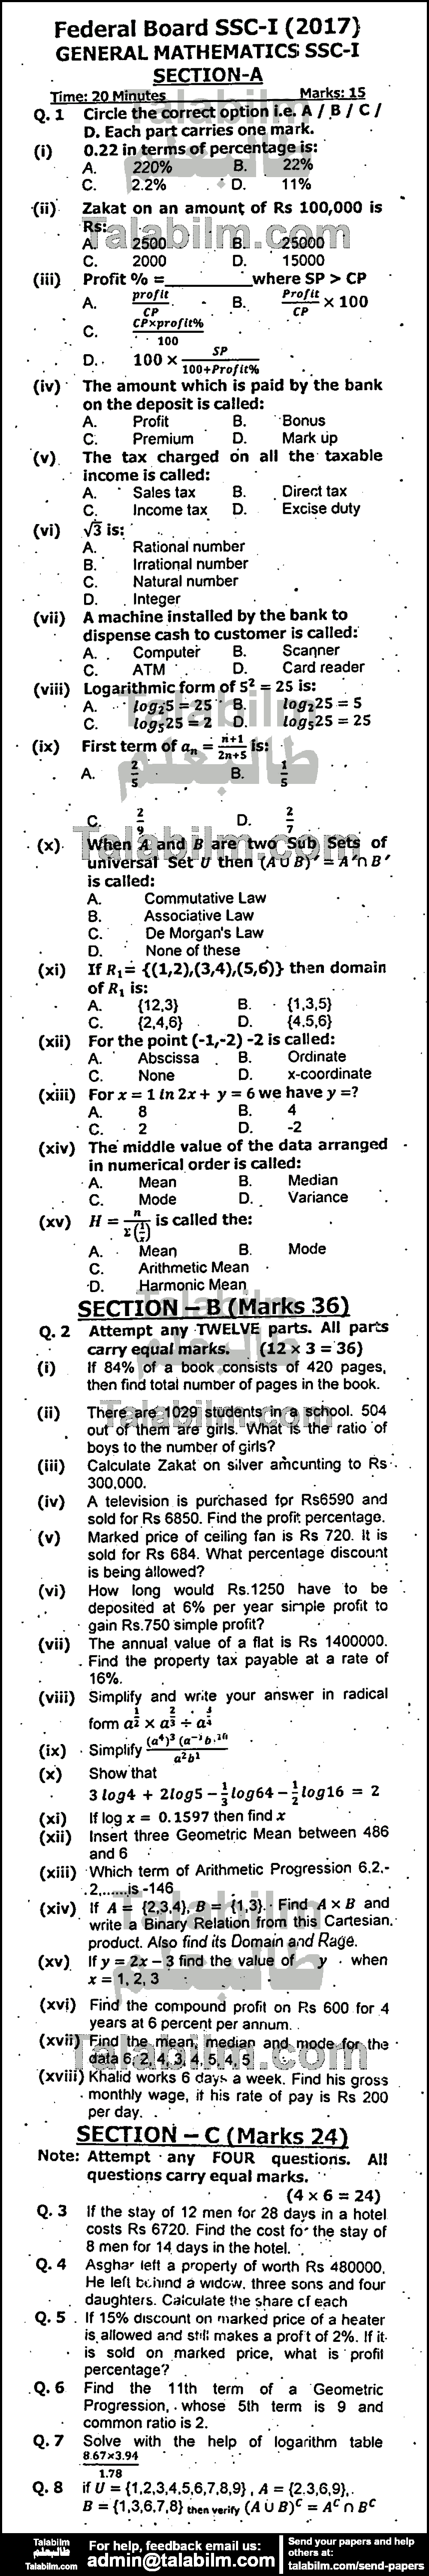 General Math 0 past paper for 2017 Group-I